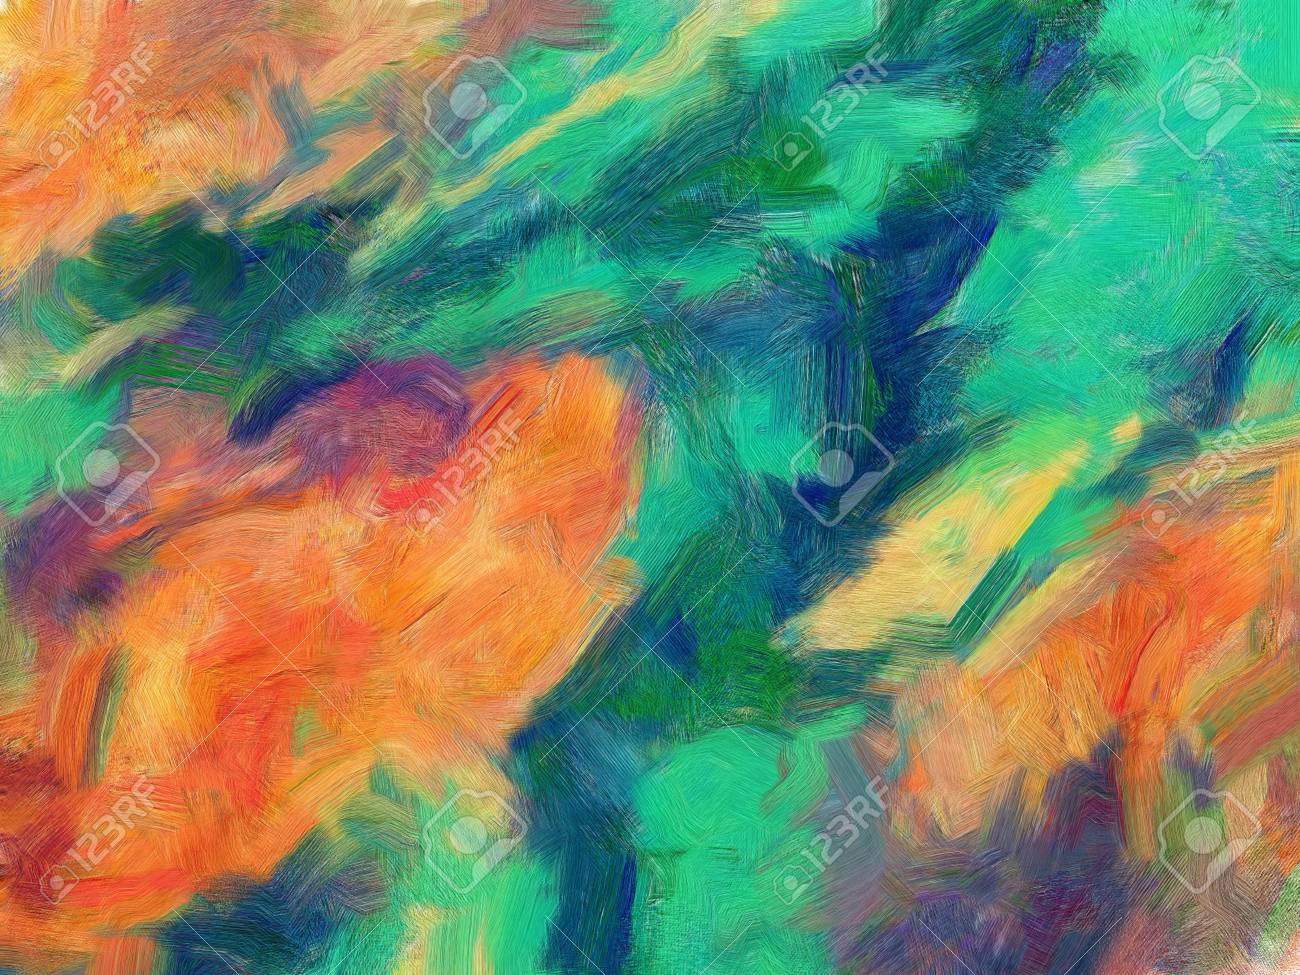 Abstract Texture Background Art Wallpaper Colorful Digital